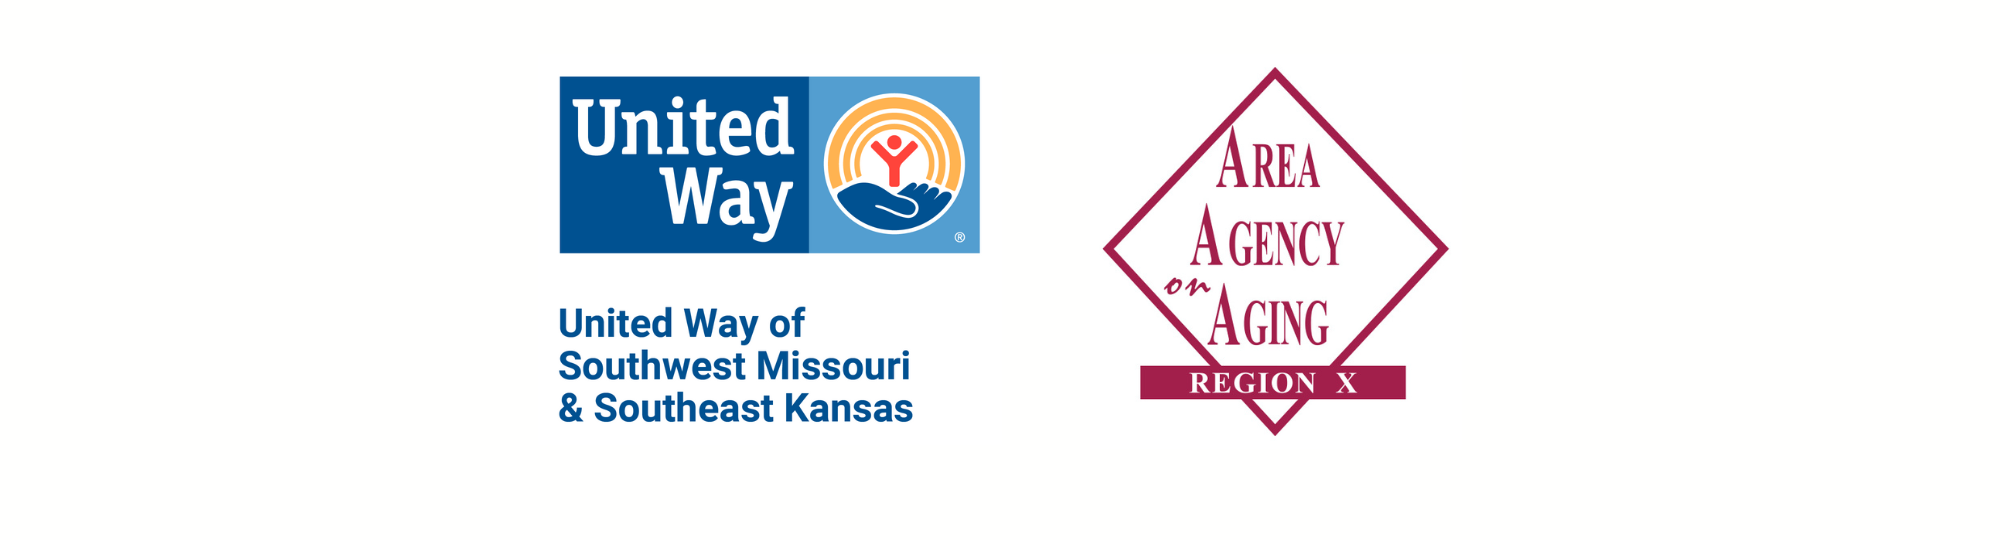 United Way and Area Agency on Aging logos